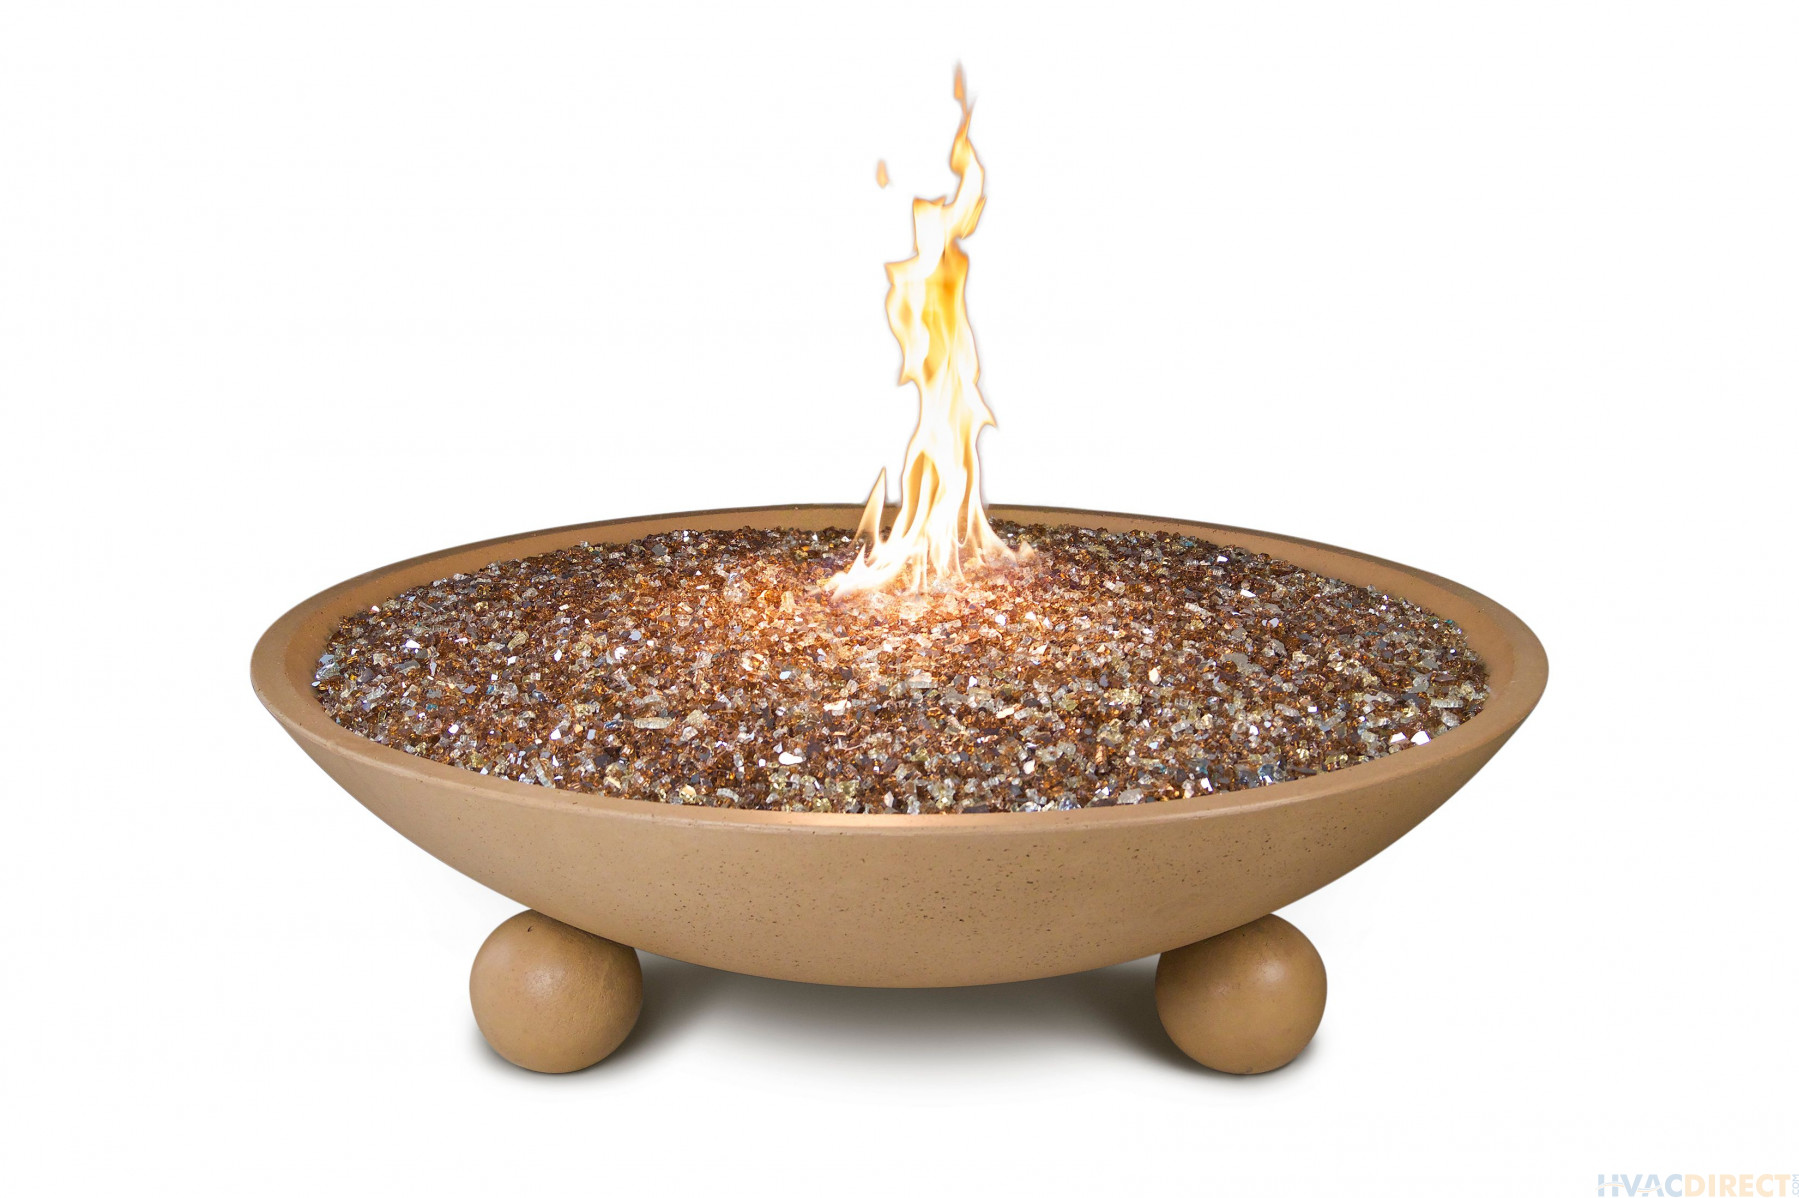 American Fyre Designs Versailles 54-Inch Fire Bowl with Ball Feet